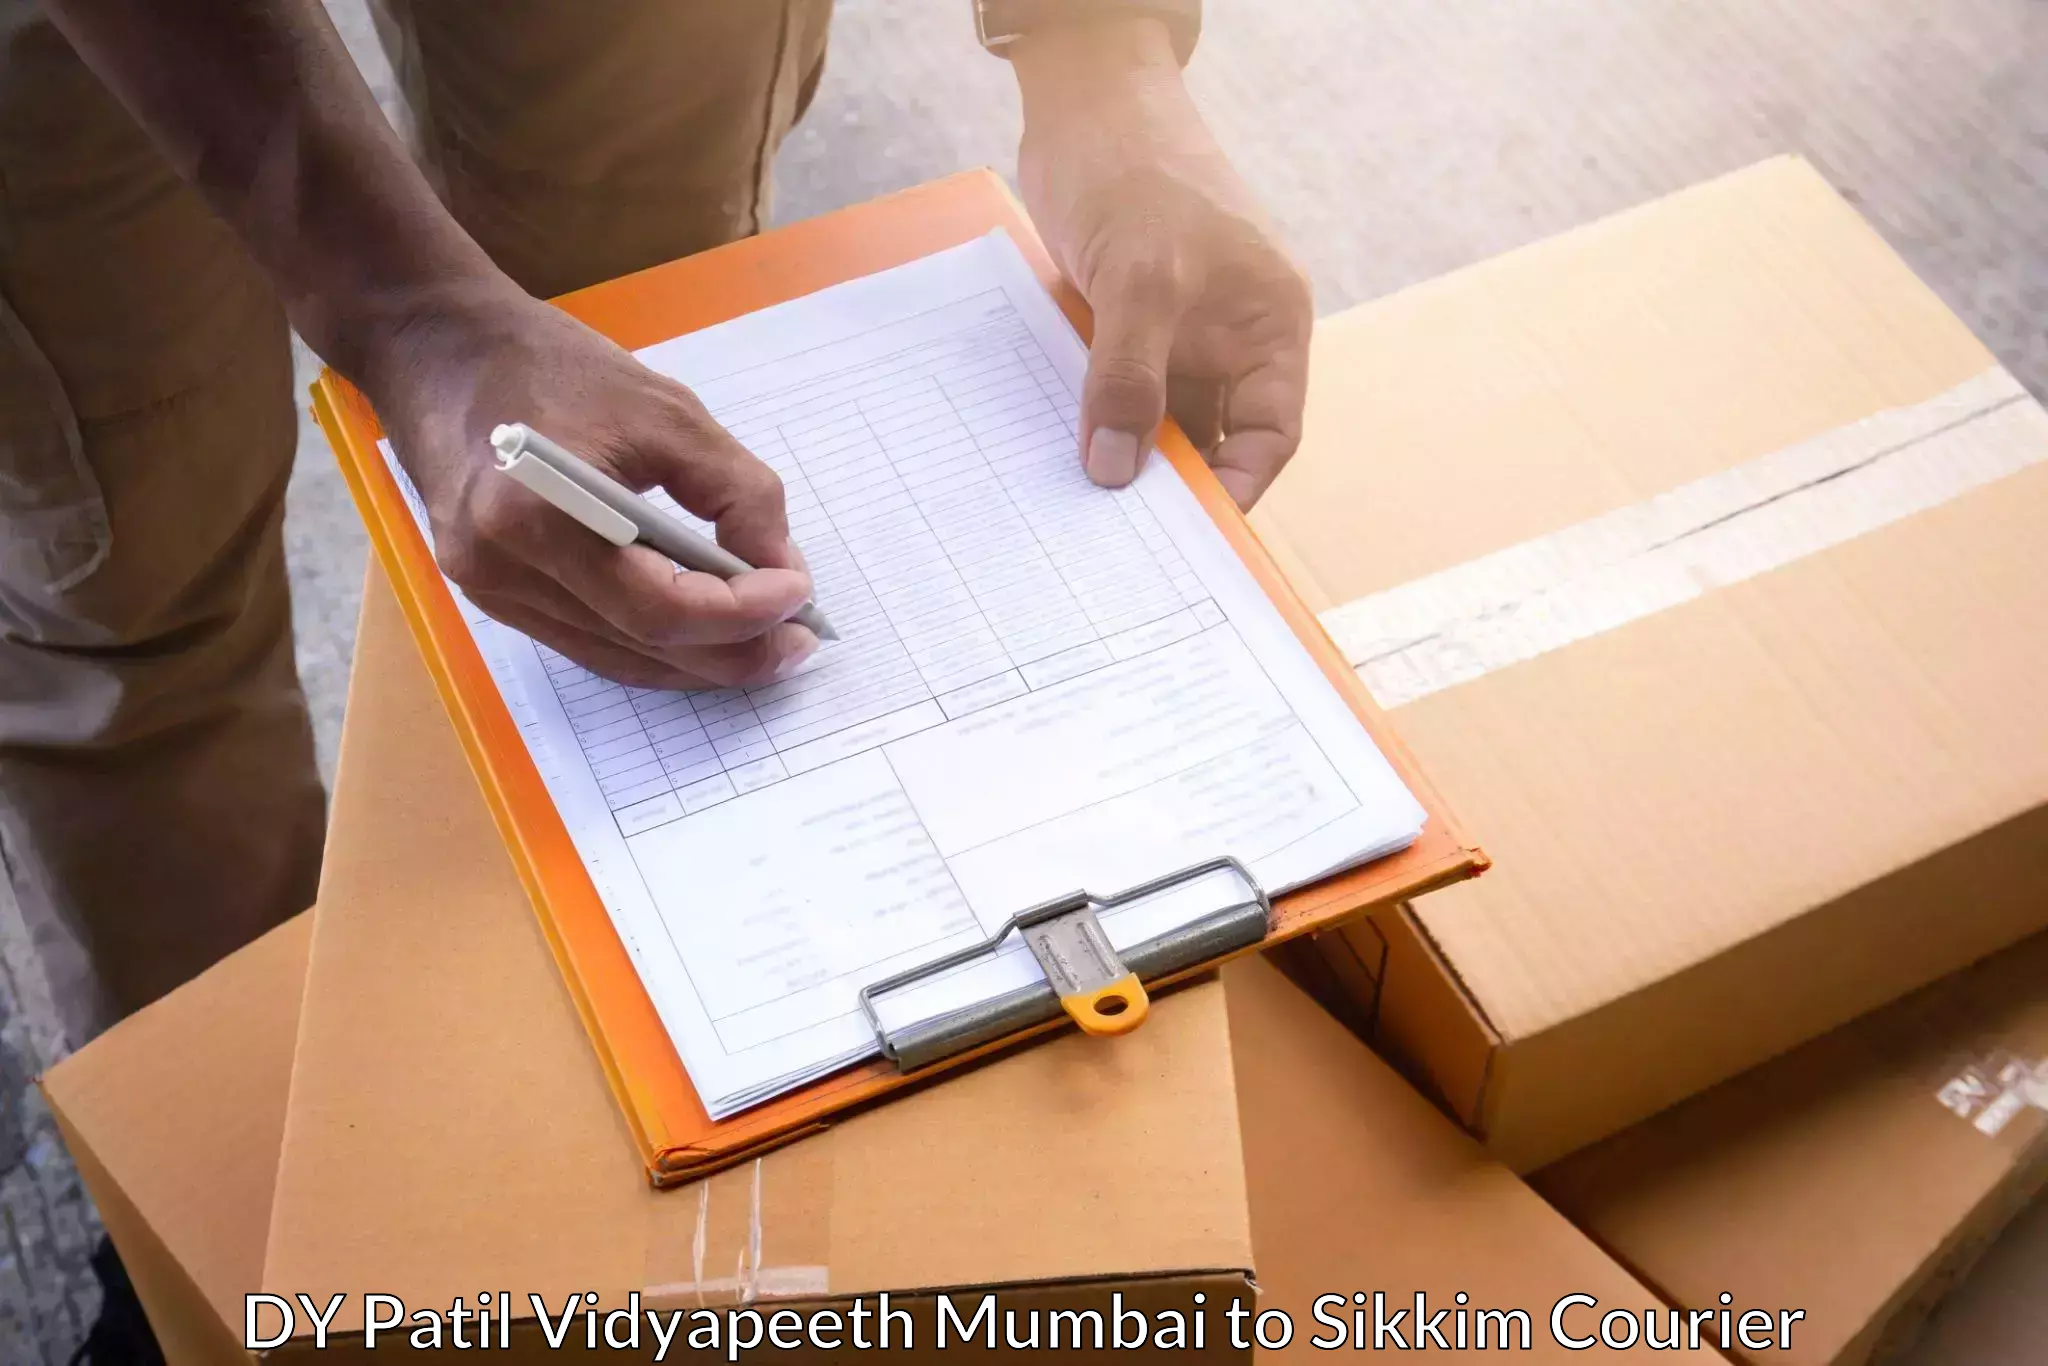 Global courier networks DY Patil Vidyapeeth Mumbai to Sikkim